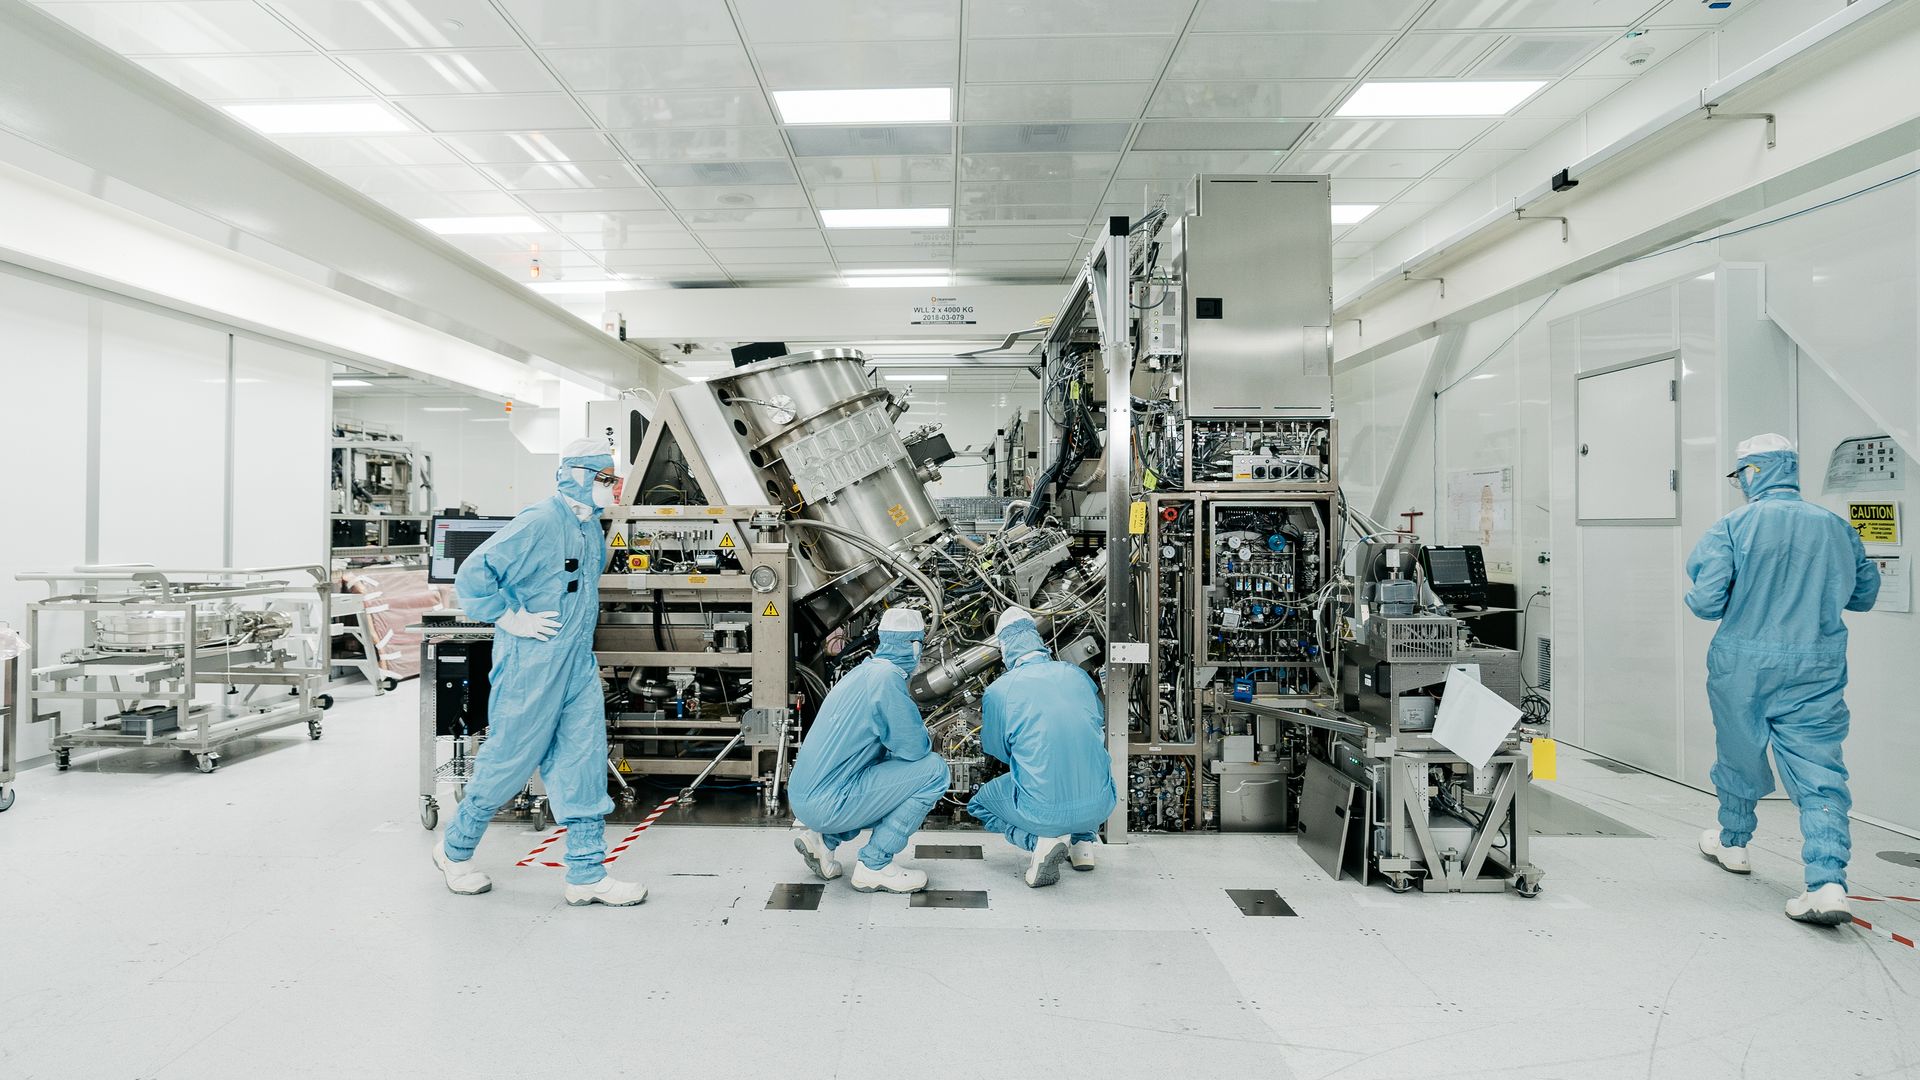 ASML, the Netherlands-based producer of the world’s most advanced lithography systems